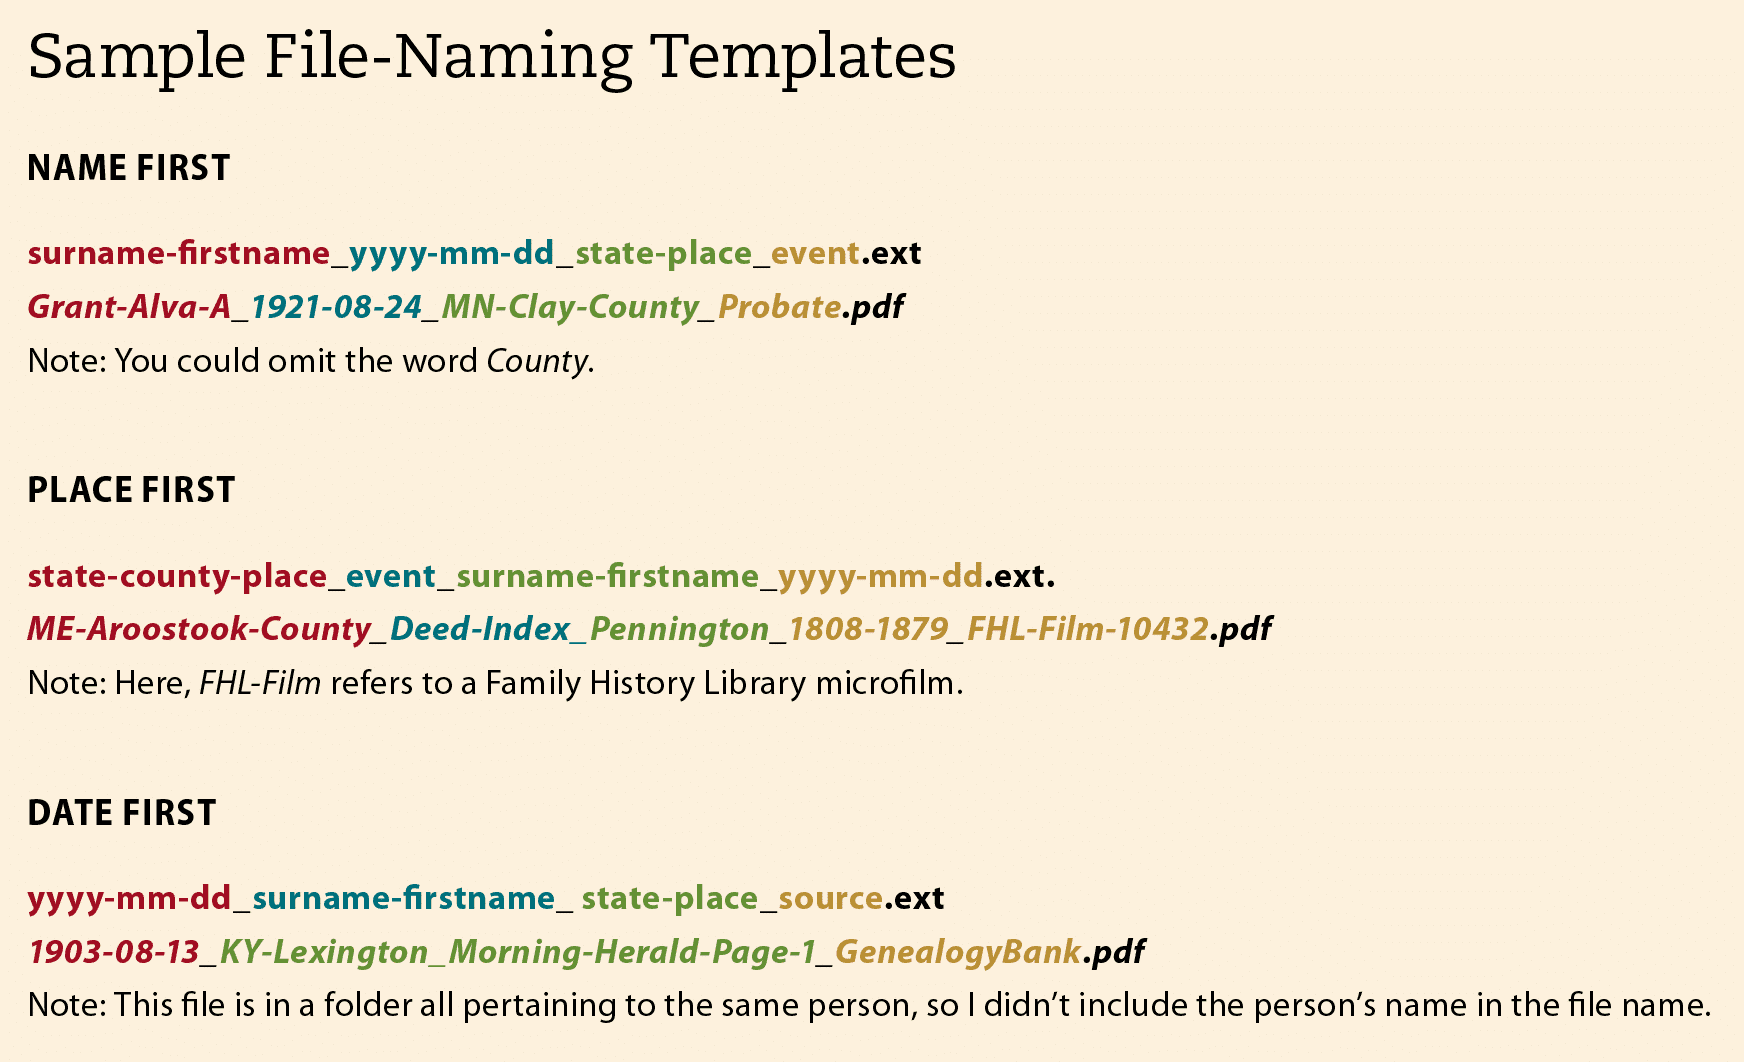 With a file-naming template, you can more easily organize your digital files. These three templates sort files by name, place or date.